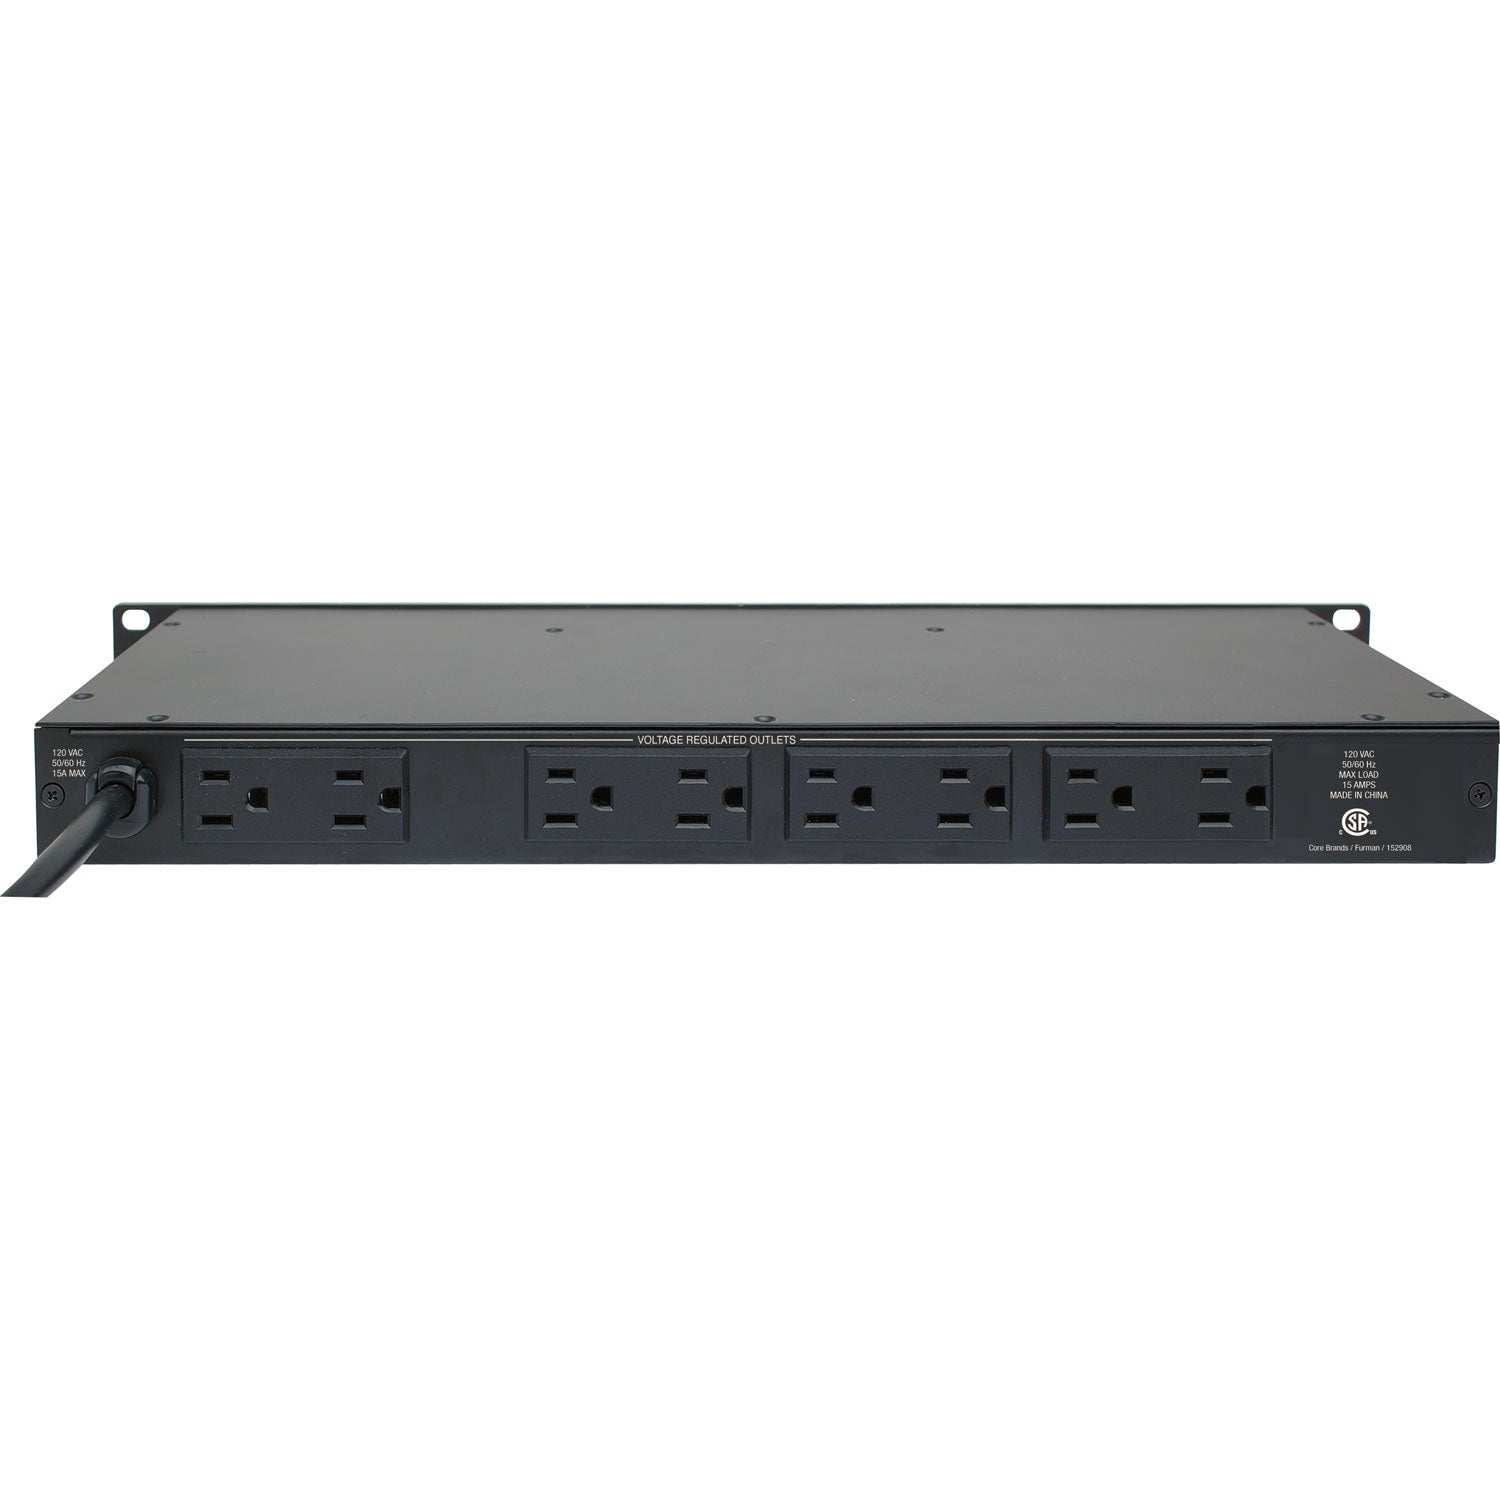 Palmer Power Supply Unit with 8 Outputs for Rack Mounting